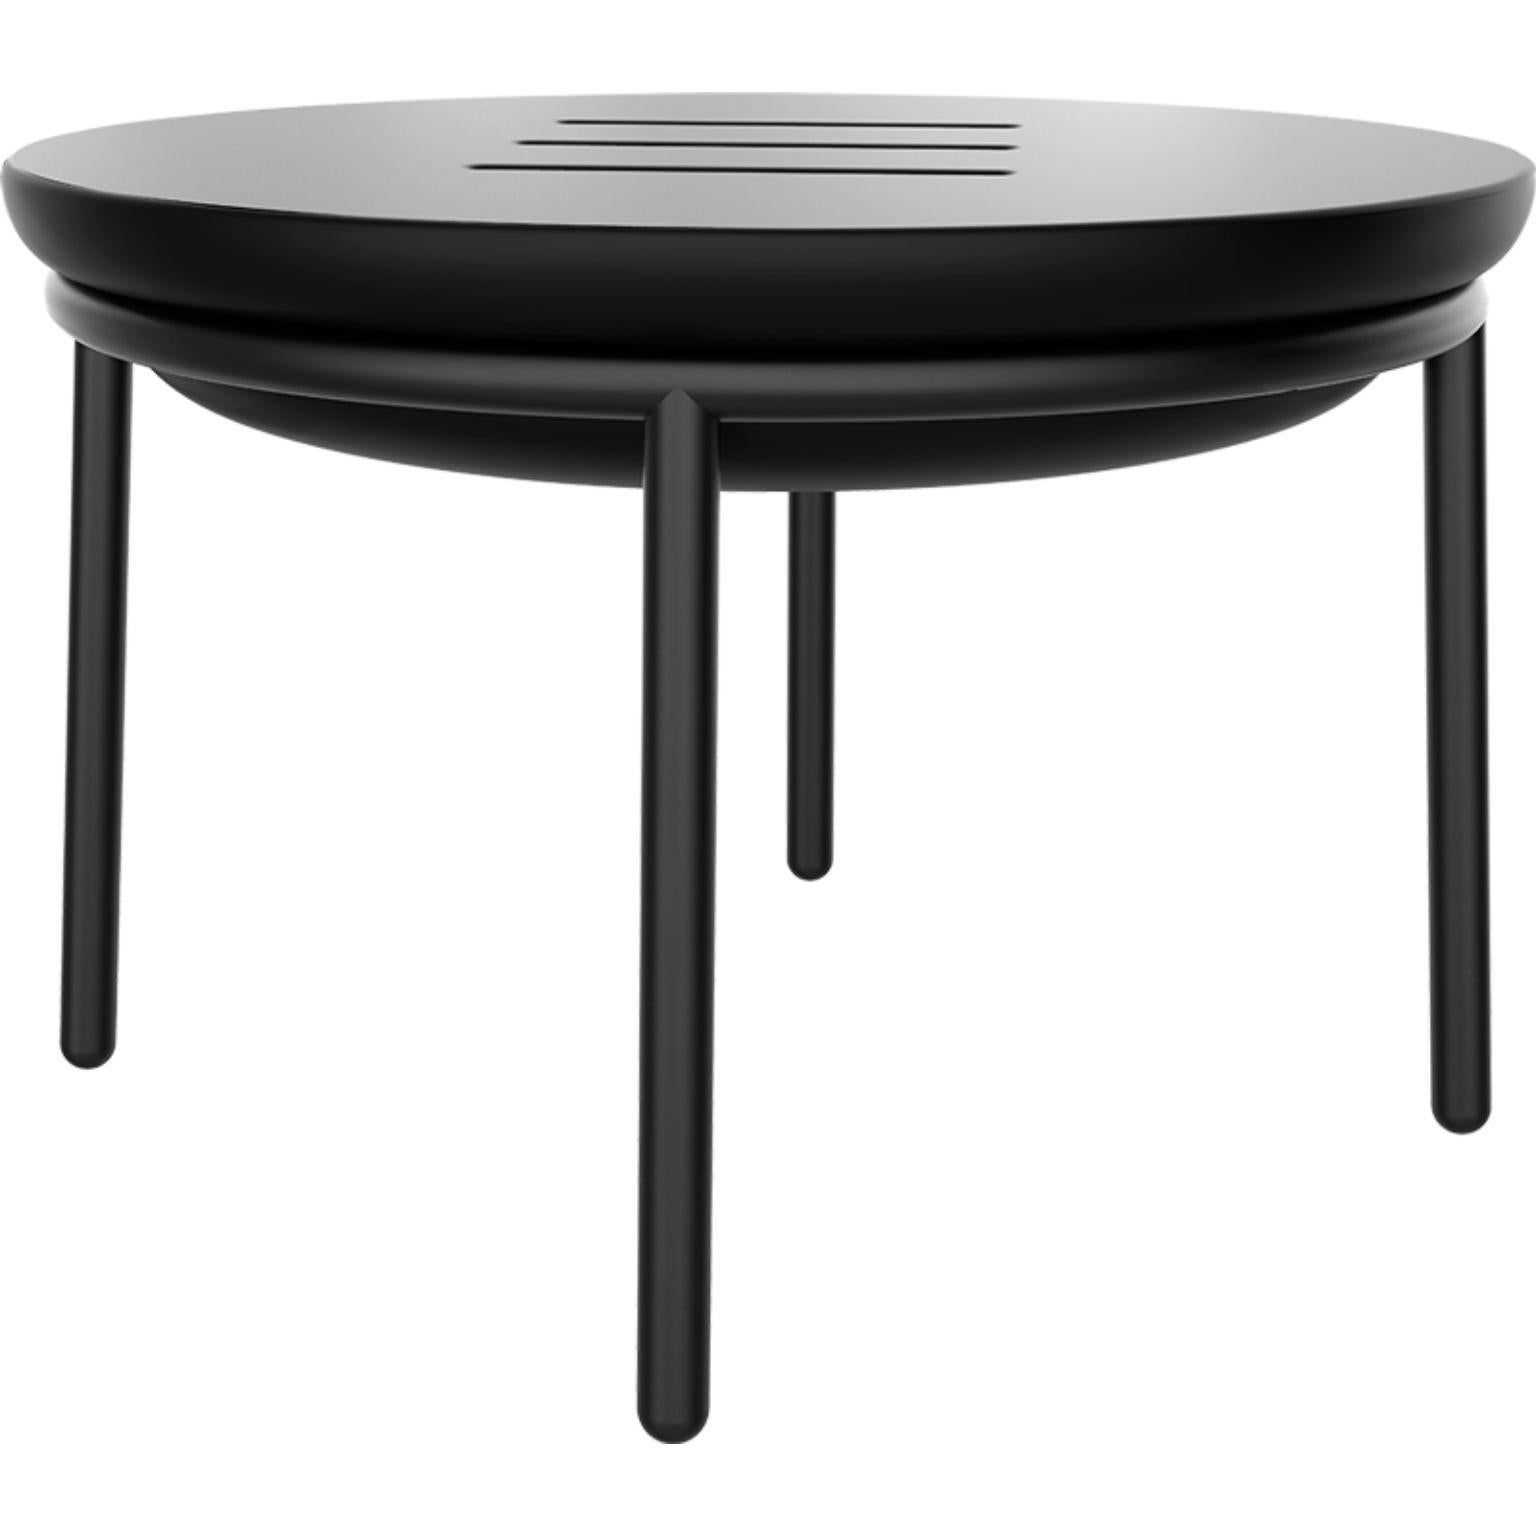 Lace black 60 low table by Mowee.
Dimensions: Ø60 x H41 cm.
Material: Polyethylene and stainless steel.
Weight: 6.2 kg.
Also available in different colors and finishes (lacquered).

Lace is a collection of furniture made by rotomoulding. Its